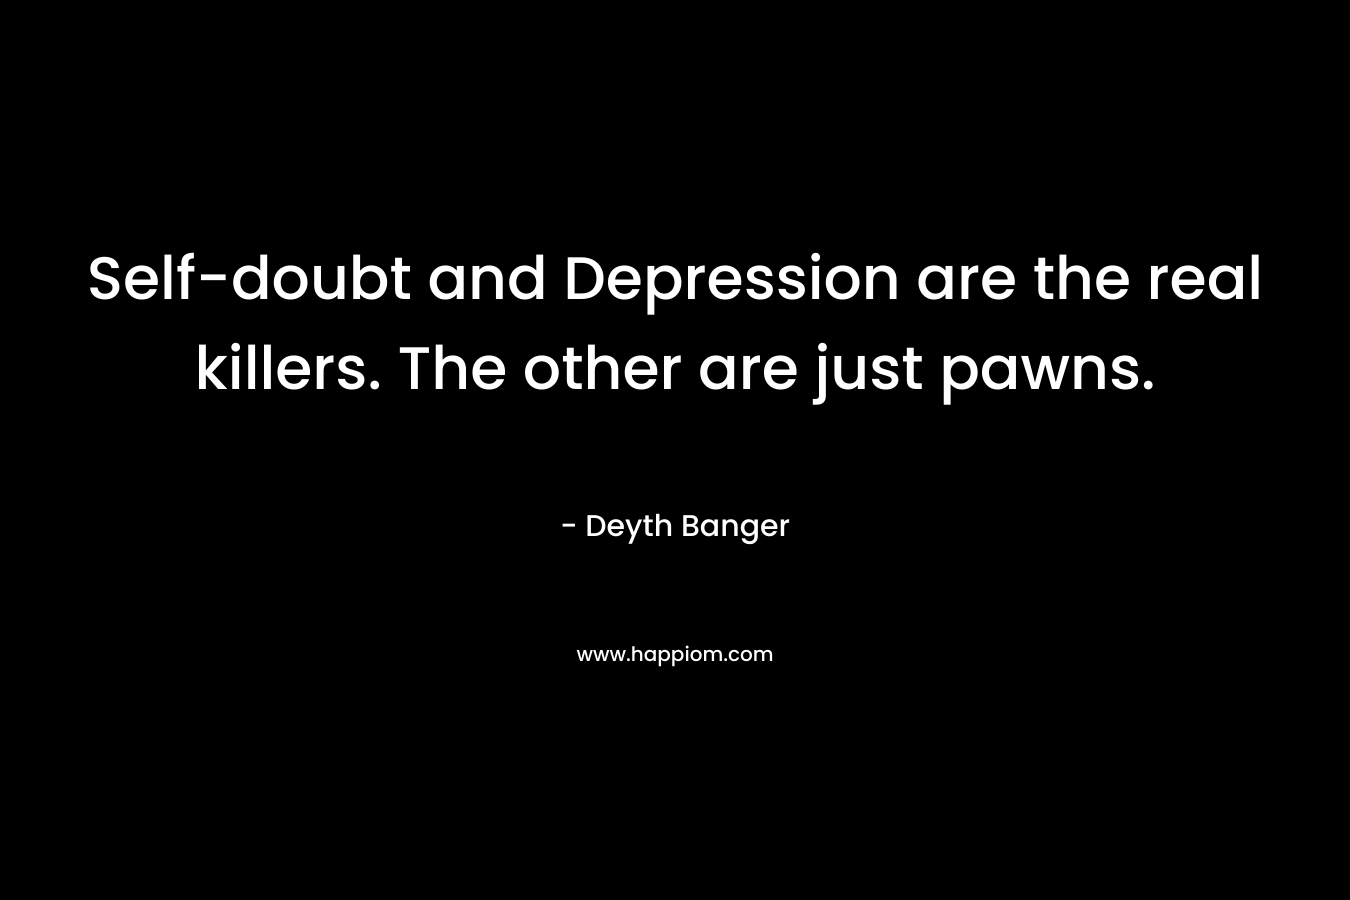 Self-doubt and Depression are the real killers. The other are just pawns. – Deyth Banger